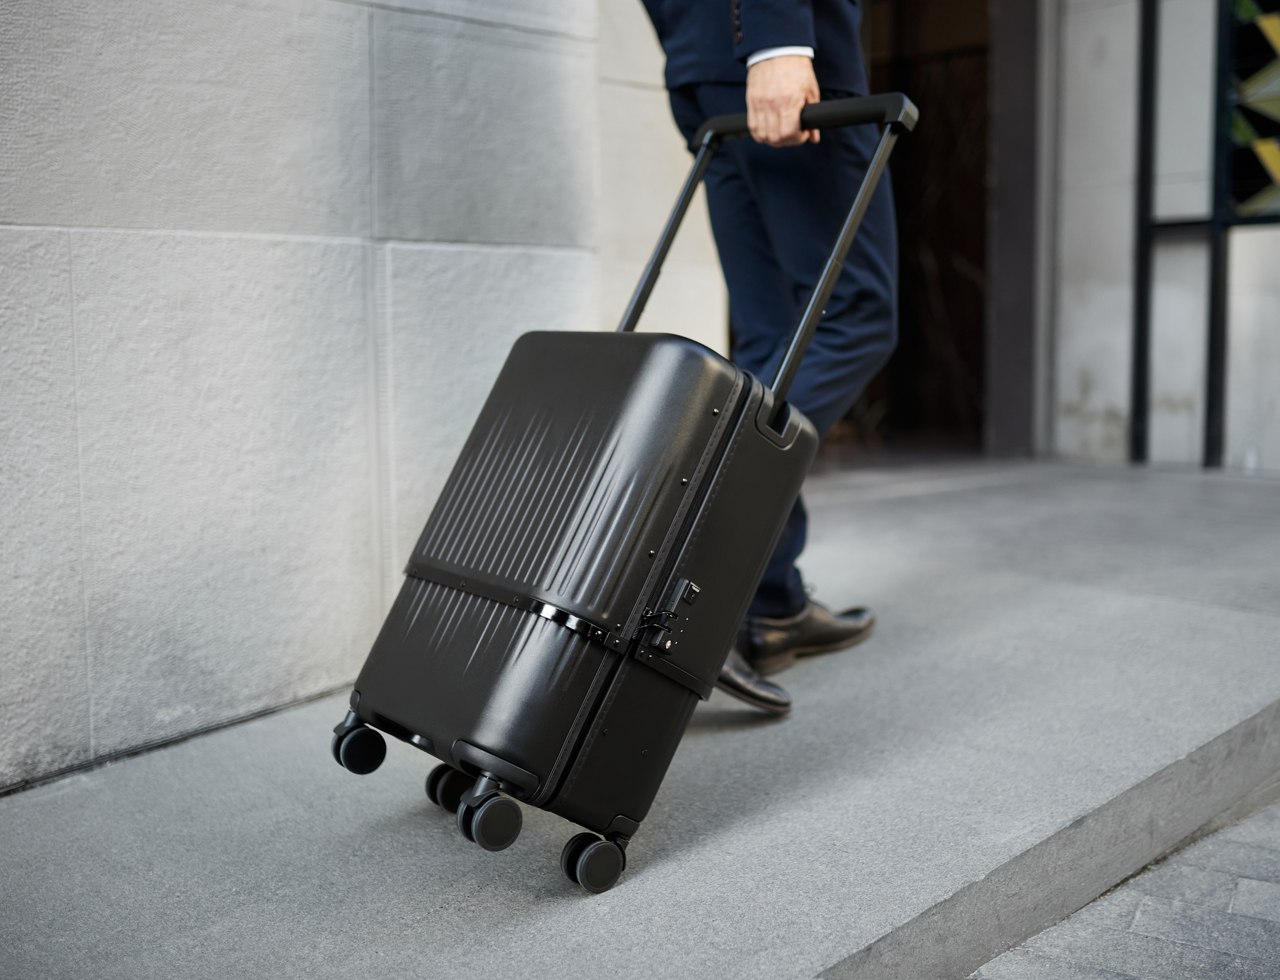 ‘Incredibly clever’ telescopic luggage bag can expand or contract based on how much you’re packing